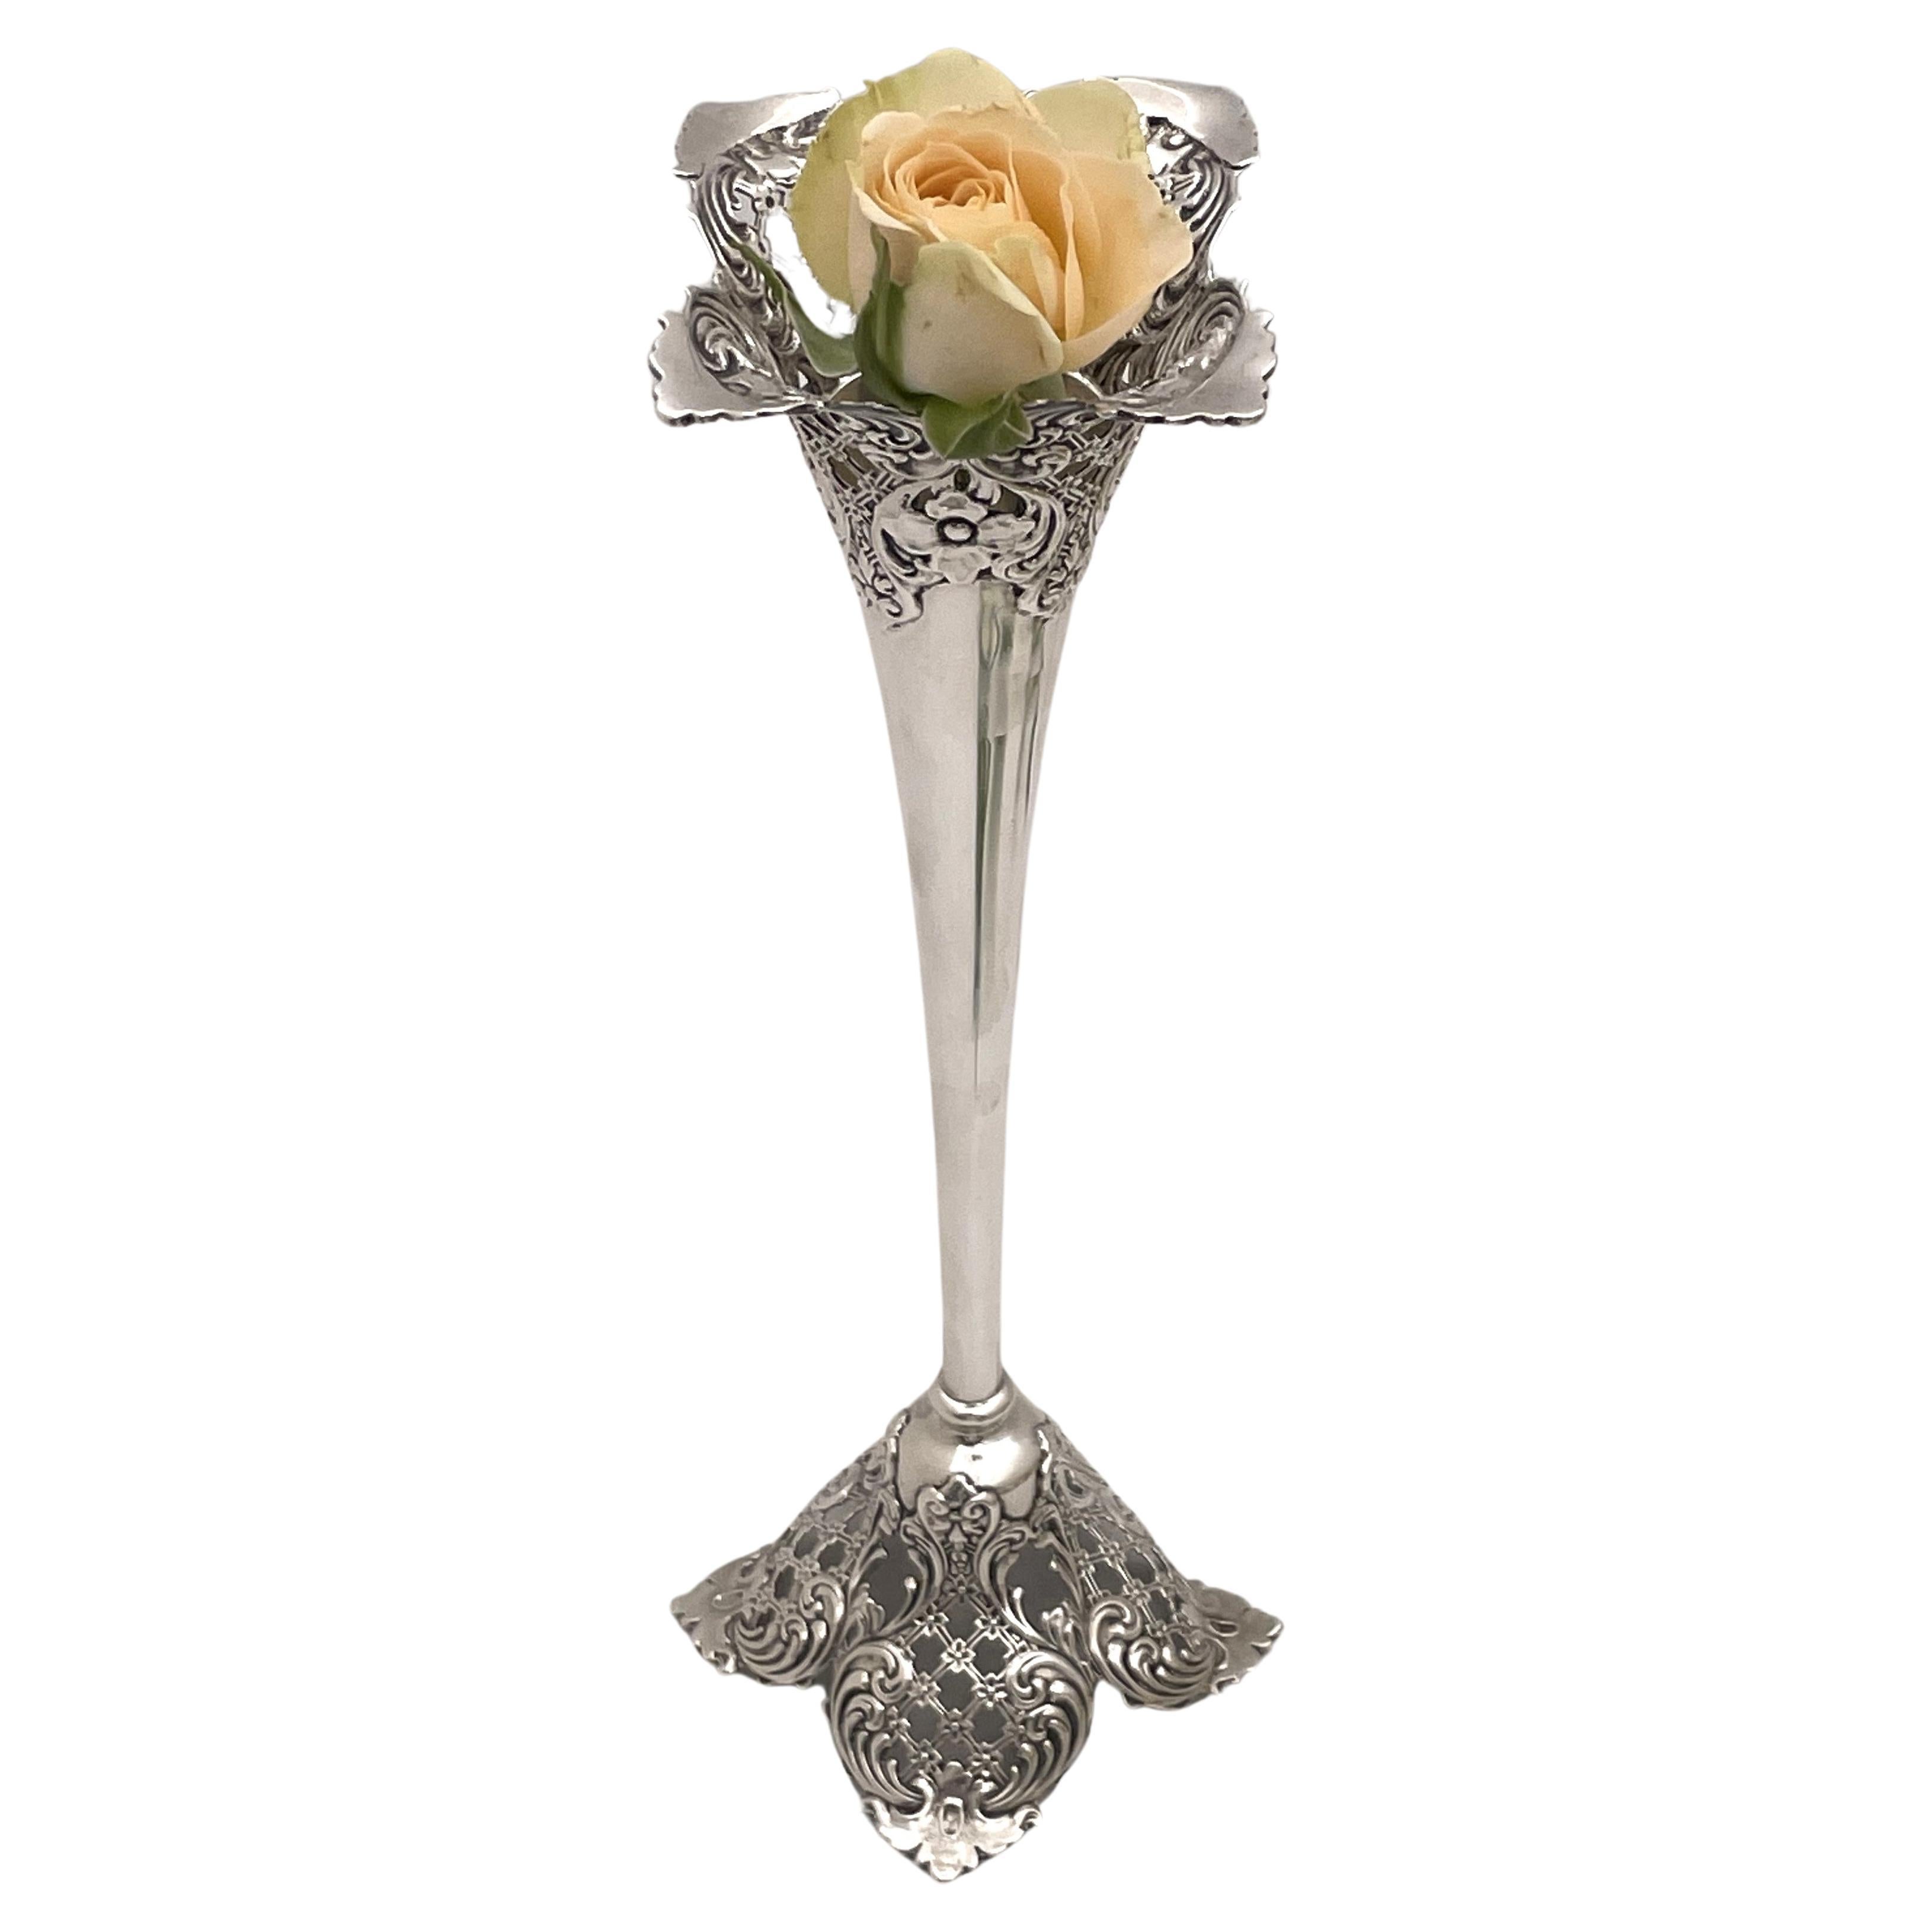  Mauser Sterling Silver Art Nouveau Bud Vase from Late 19th/ Early 20th Century For Sale